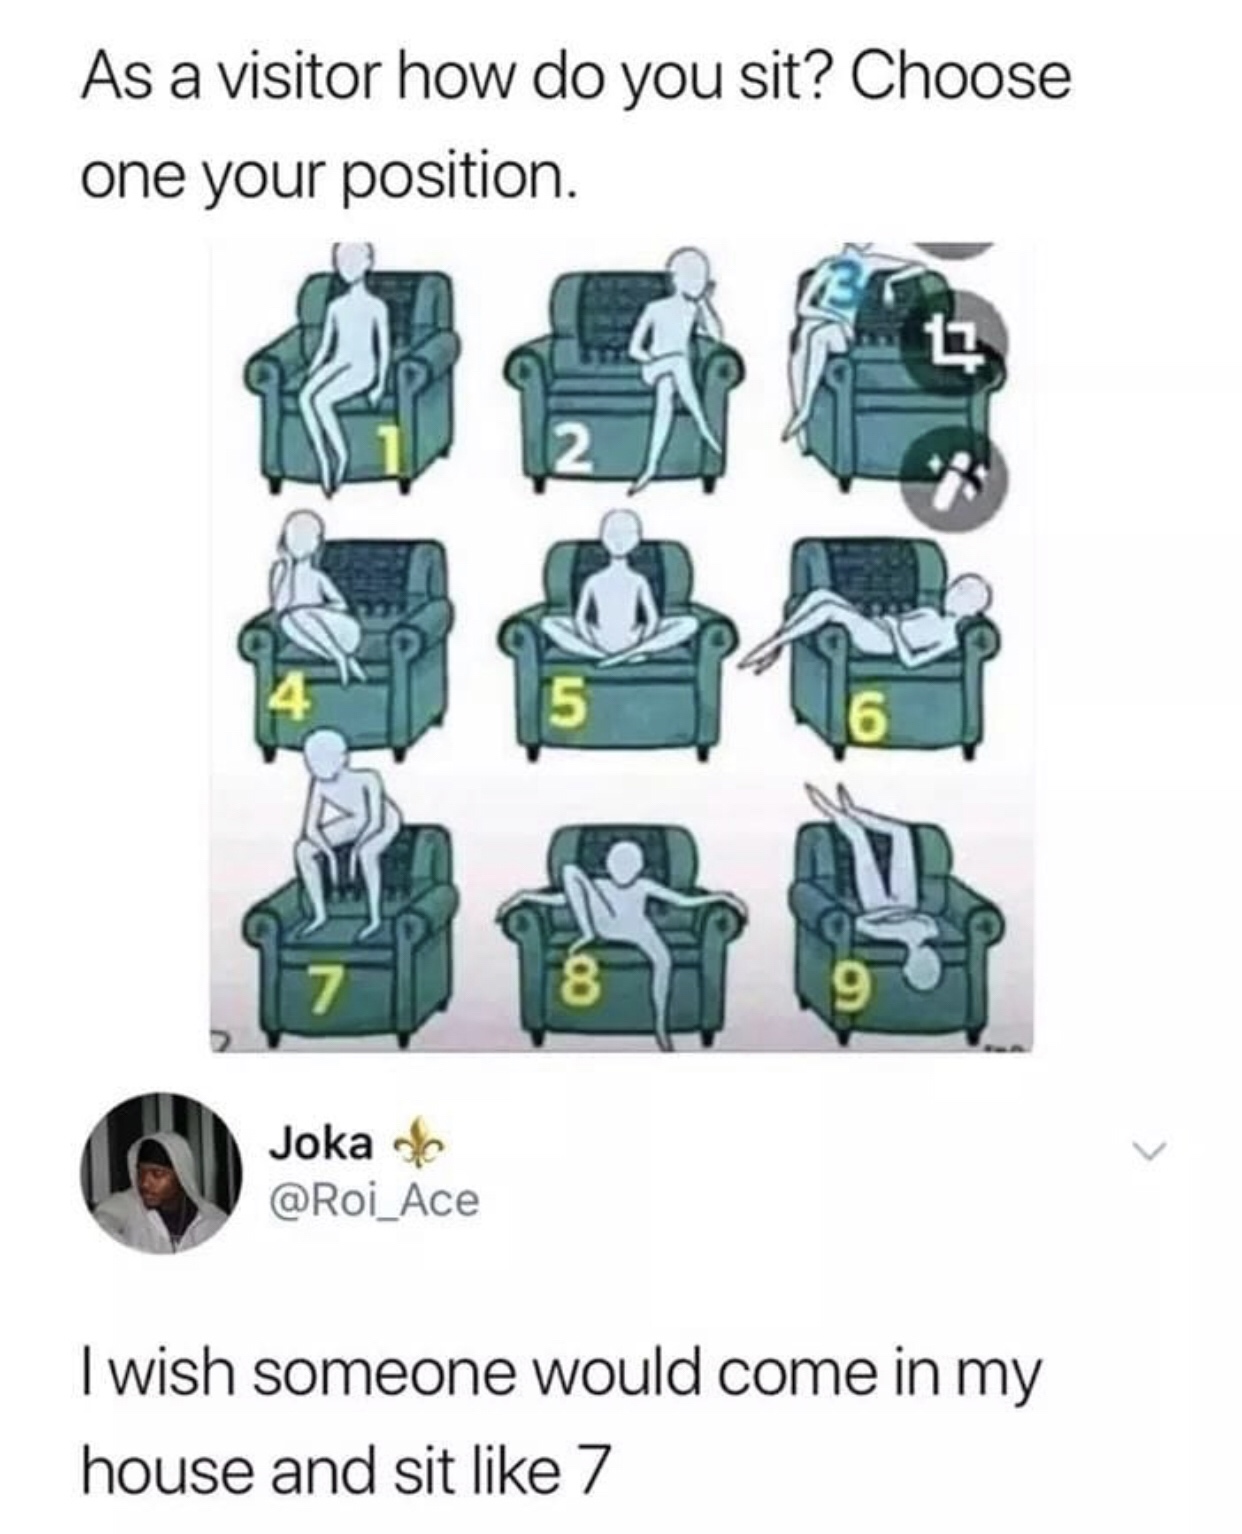 funniest memes july 2019 - As a visitor how do you sit? Choose one your position. G Joka ofc I wish someone would come in my house and sit 7